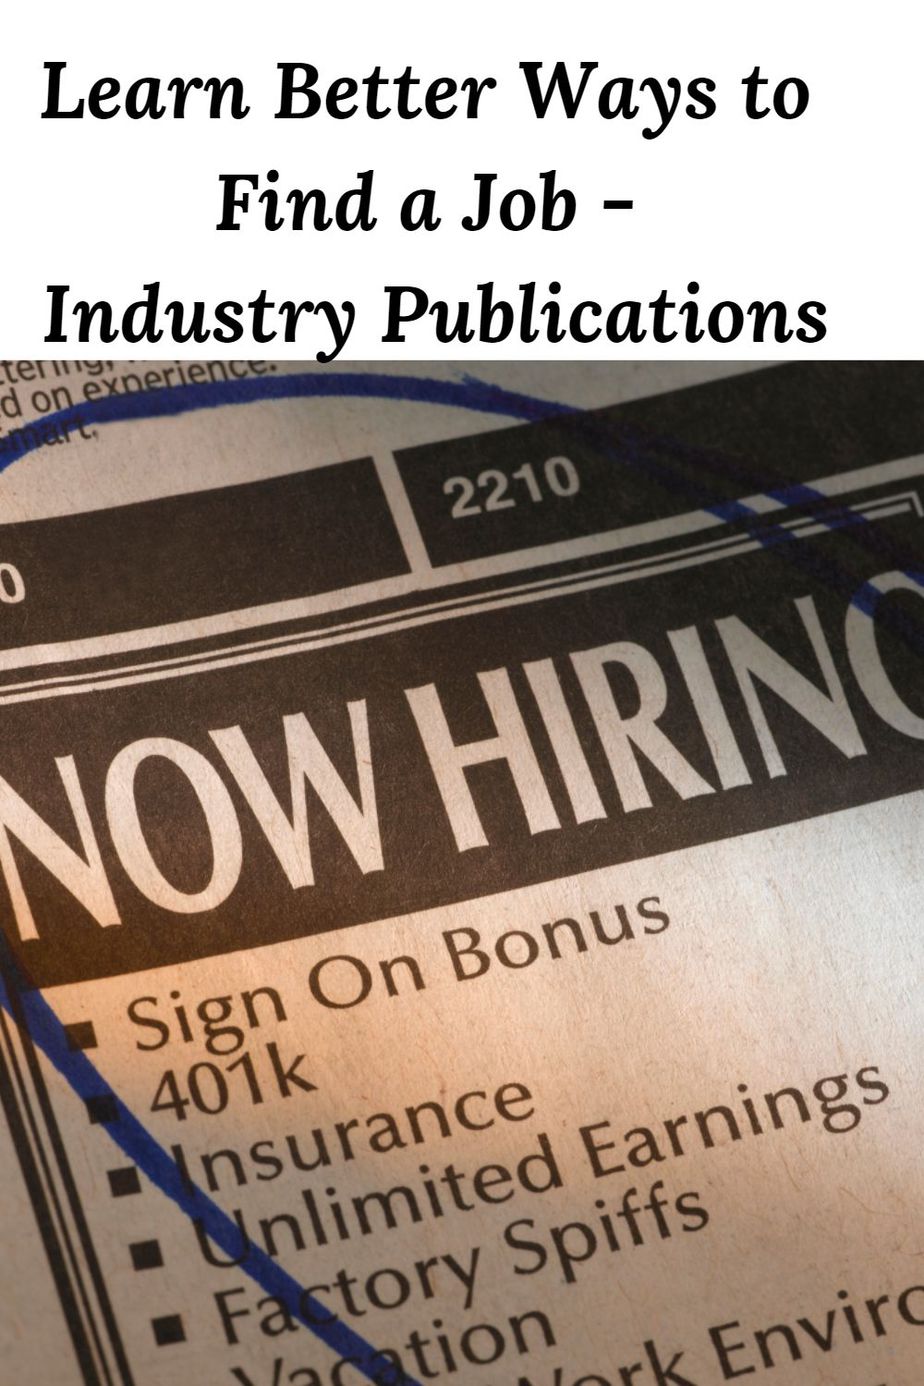 Learn Better Ways to Find a Job - Industry Publications